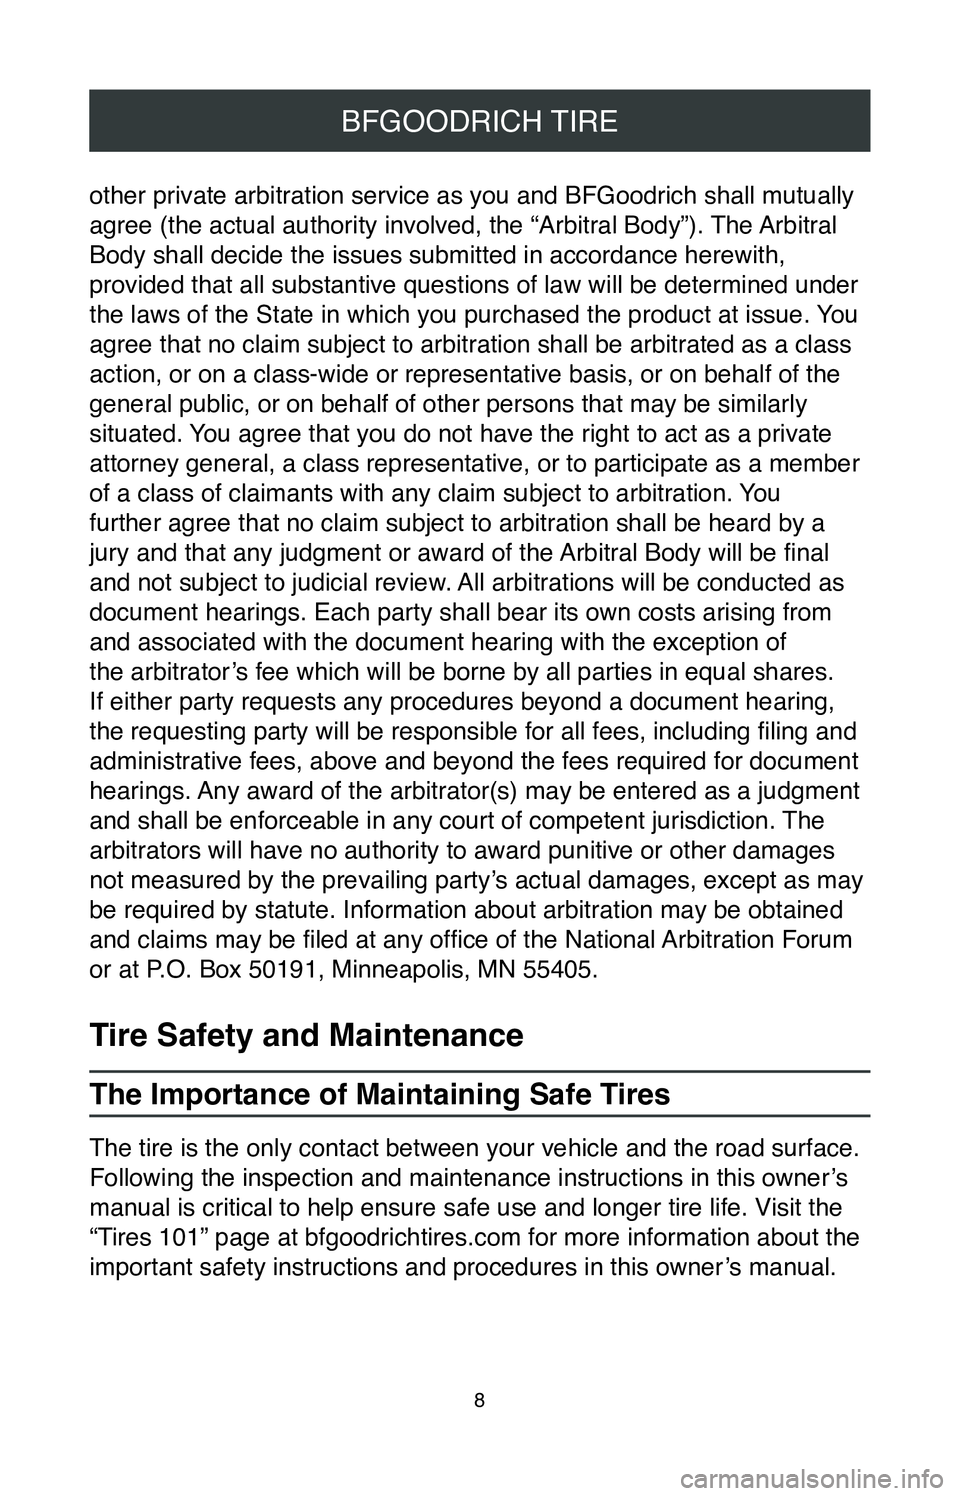 TOYOTA SIENNA 2020  Warranties & Maintenance Guides (in English) 8
BFGOODRICH TIRE
other private arbitration service as you and BFGoodrich shall mutually 
agree (the actual authority involved, the “Arbitral Body”). The Arbitral 
Body shall decide the issues sub